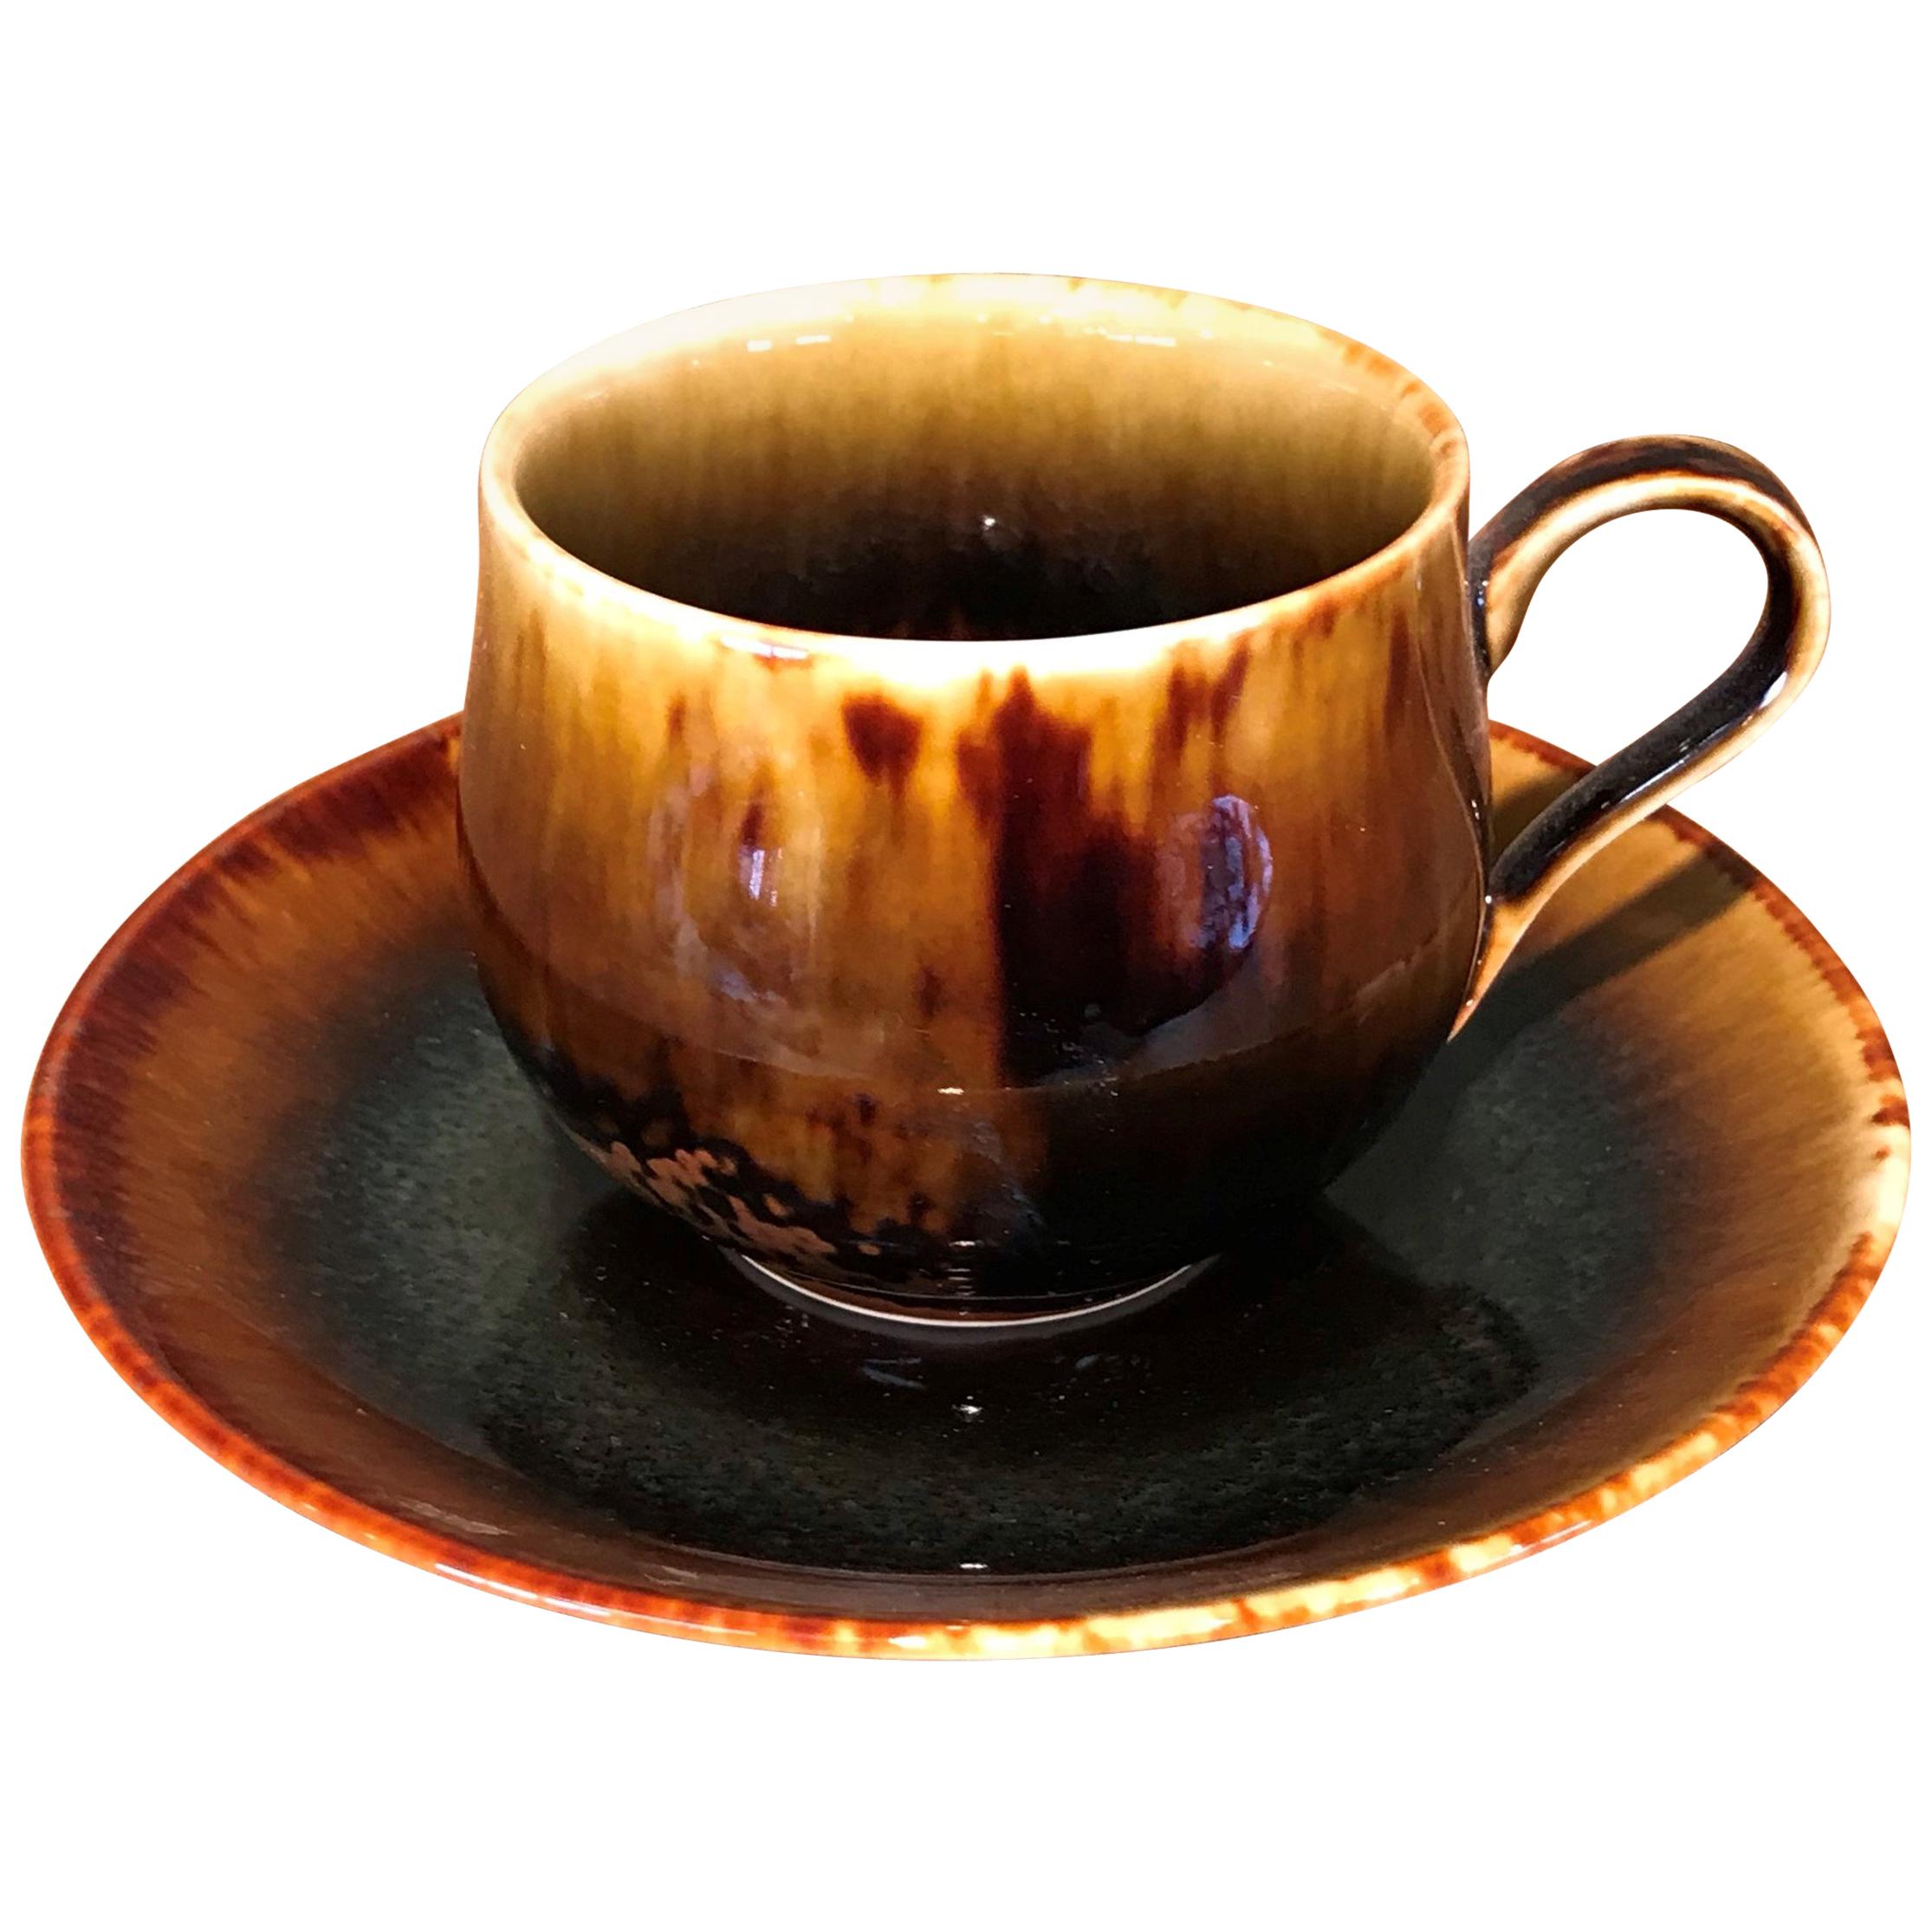 Japanese Black Hand-Glazed Porcelain Cup & Saucer by Contemporary Master Artist